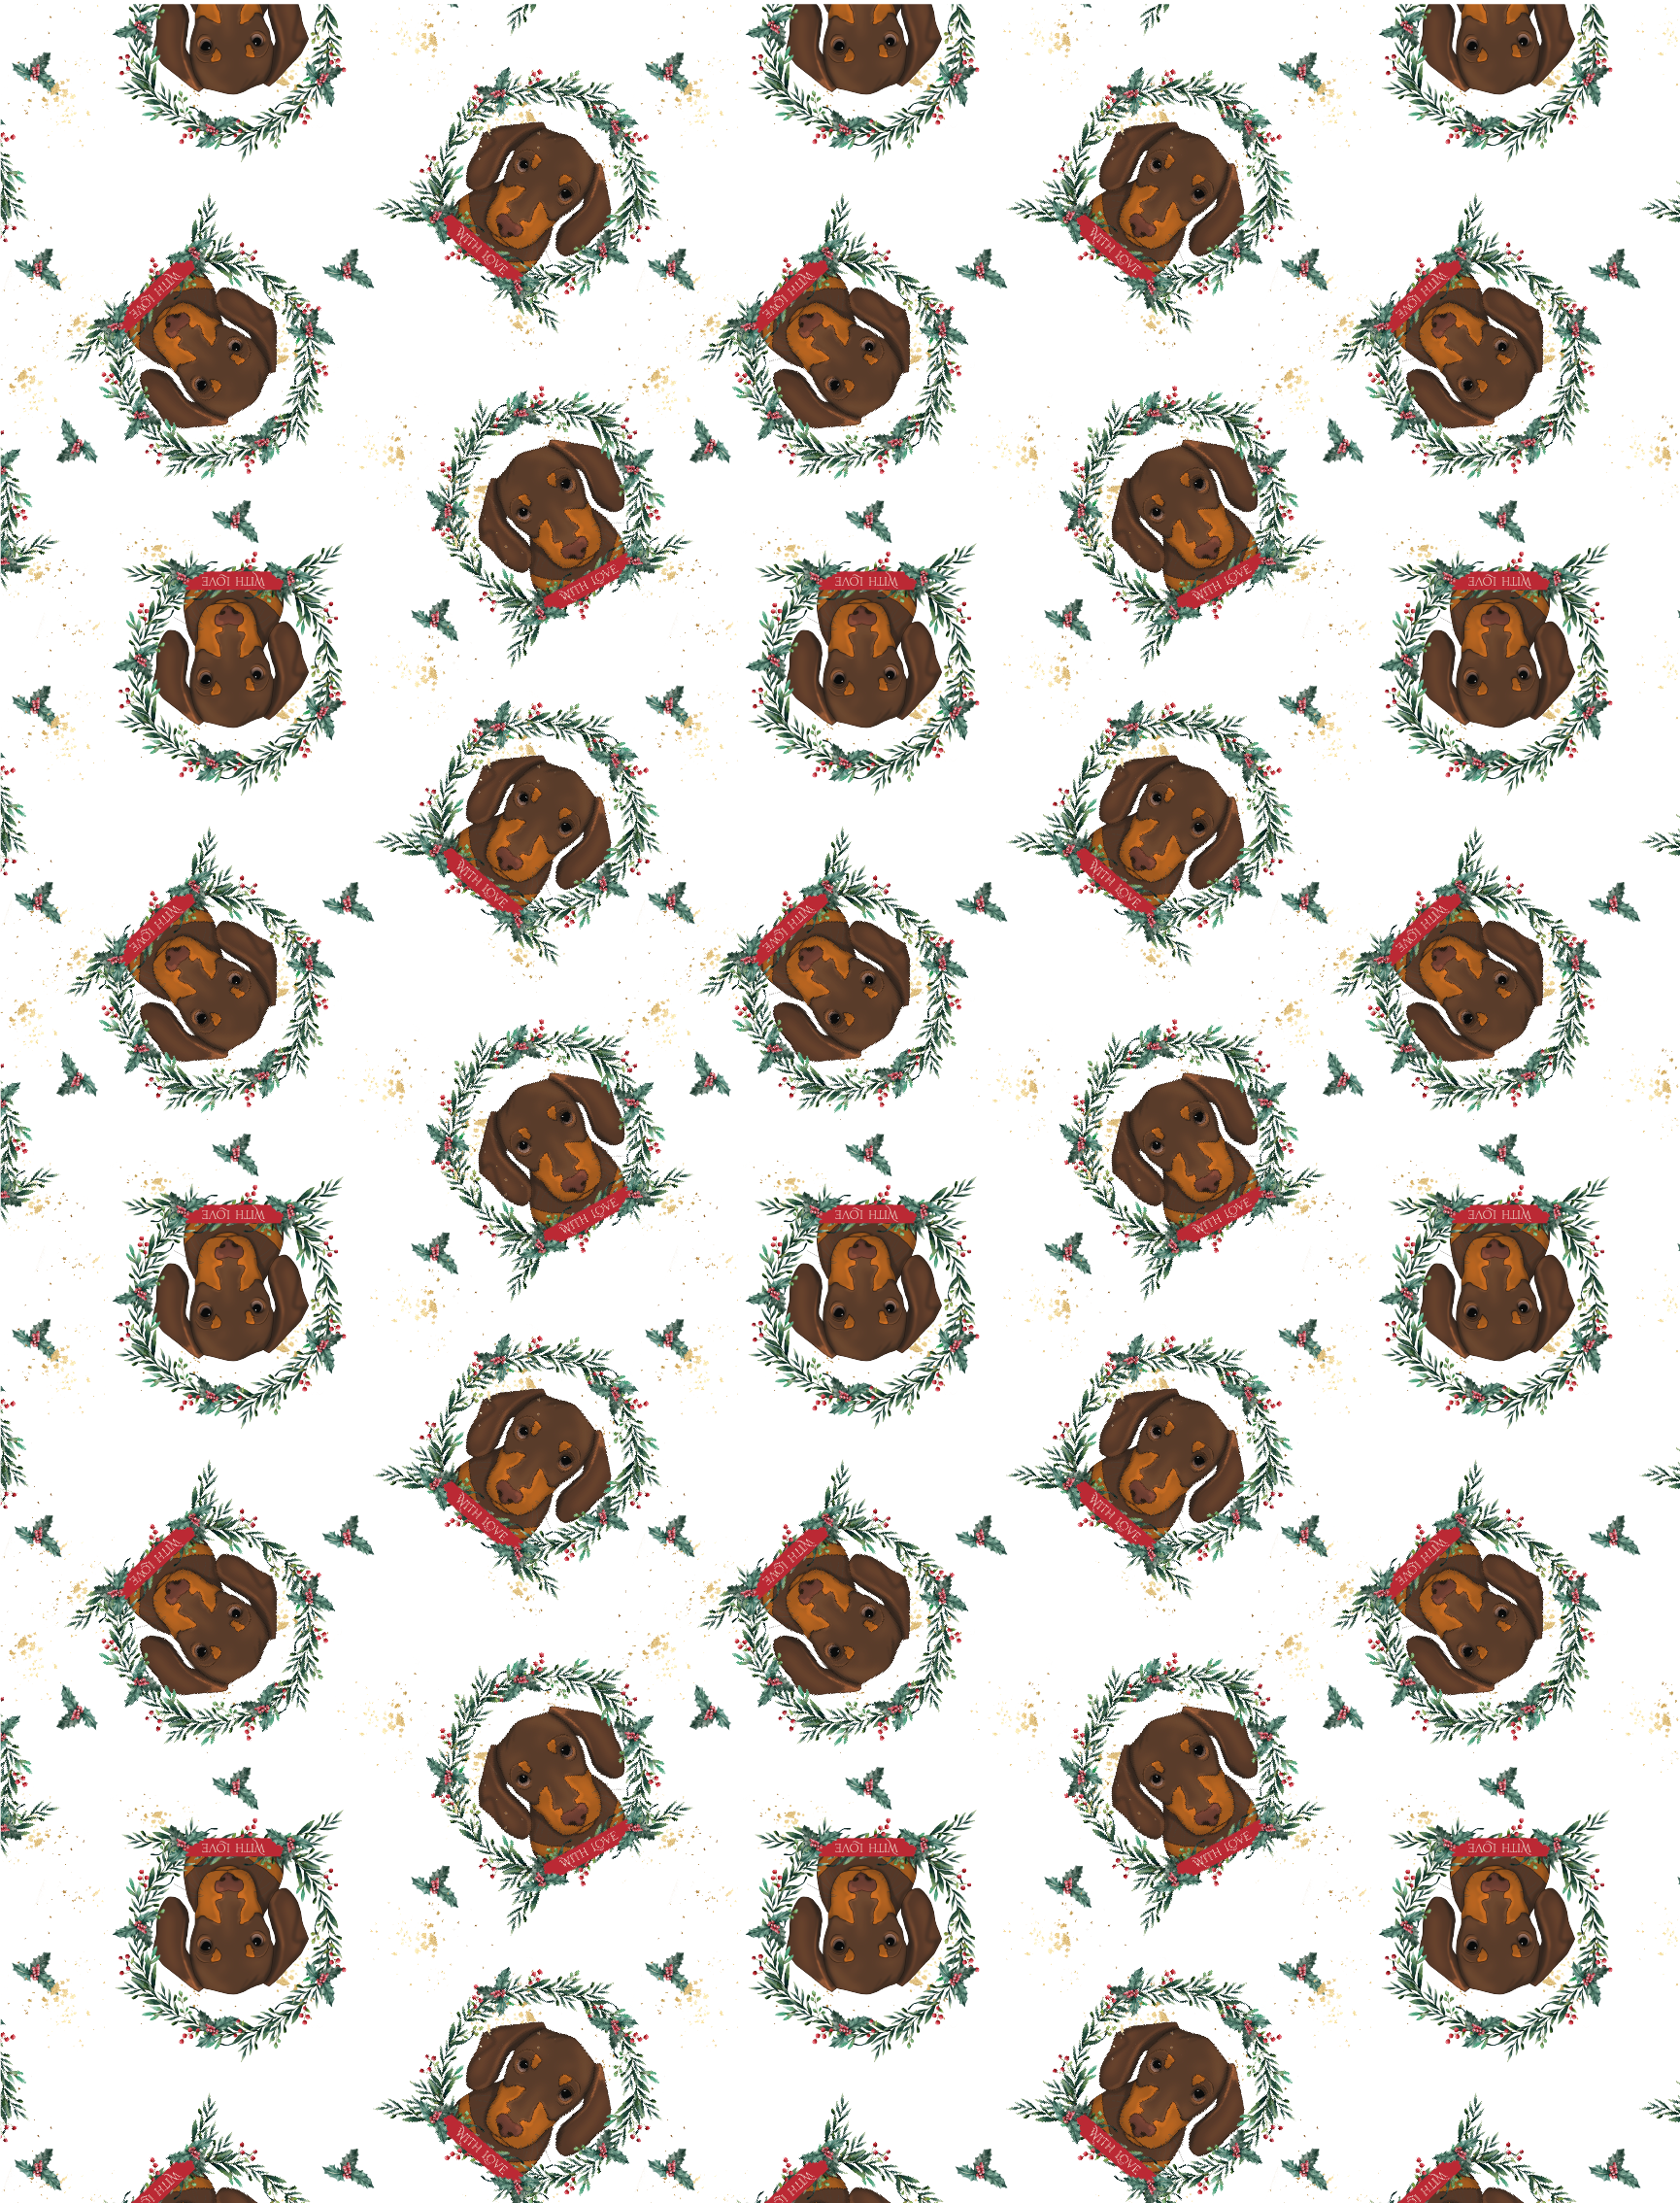 Luxury 100gsm Dachshund/Sausage Dog Wrapping Paper